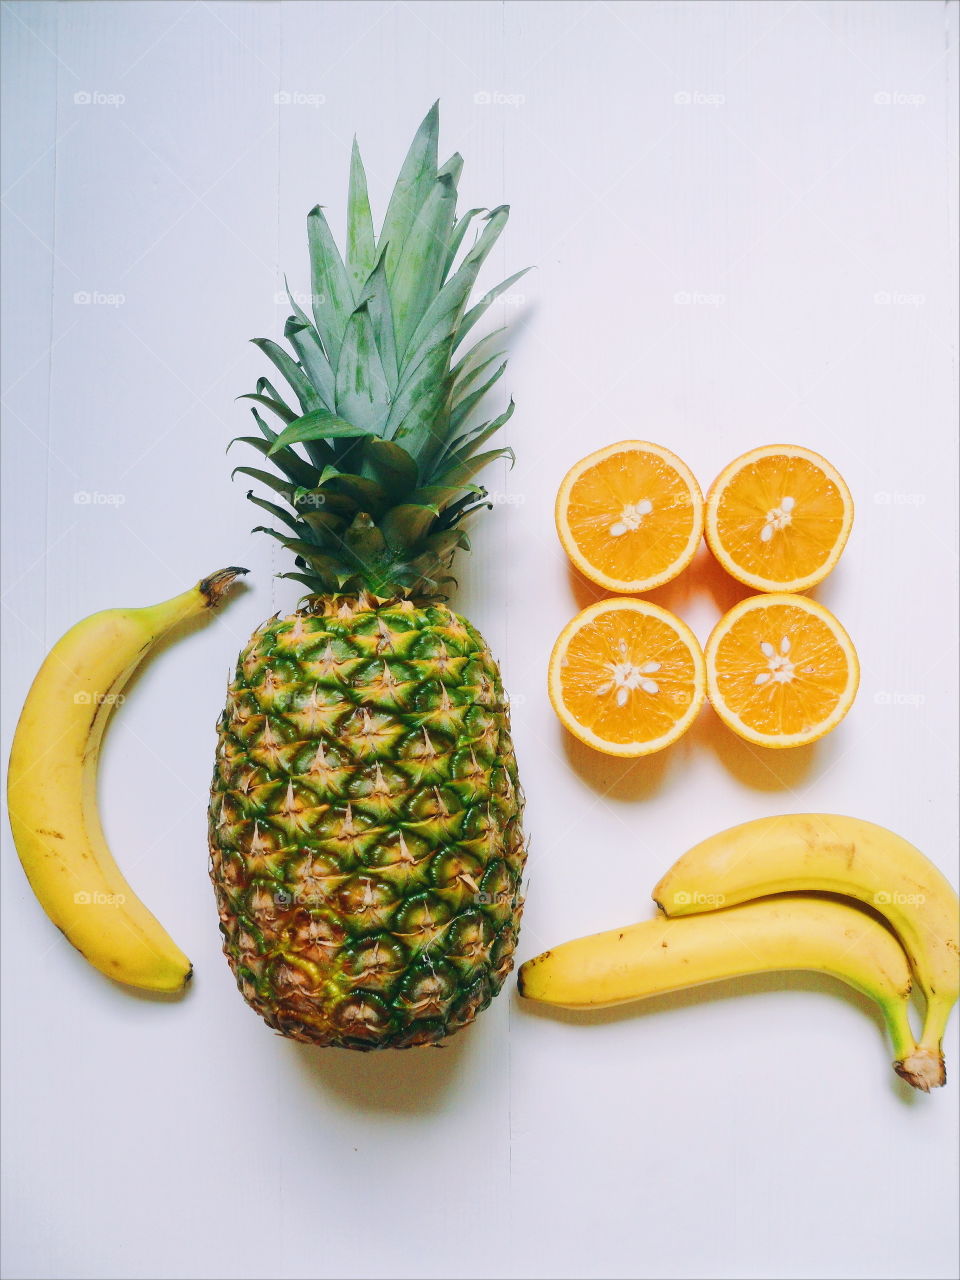 pineapple, sliced ​​orange and bananas on a white background